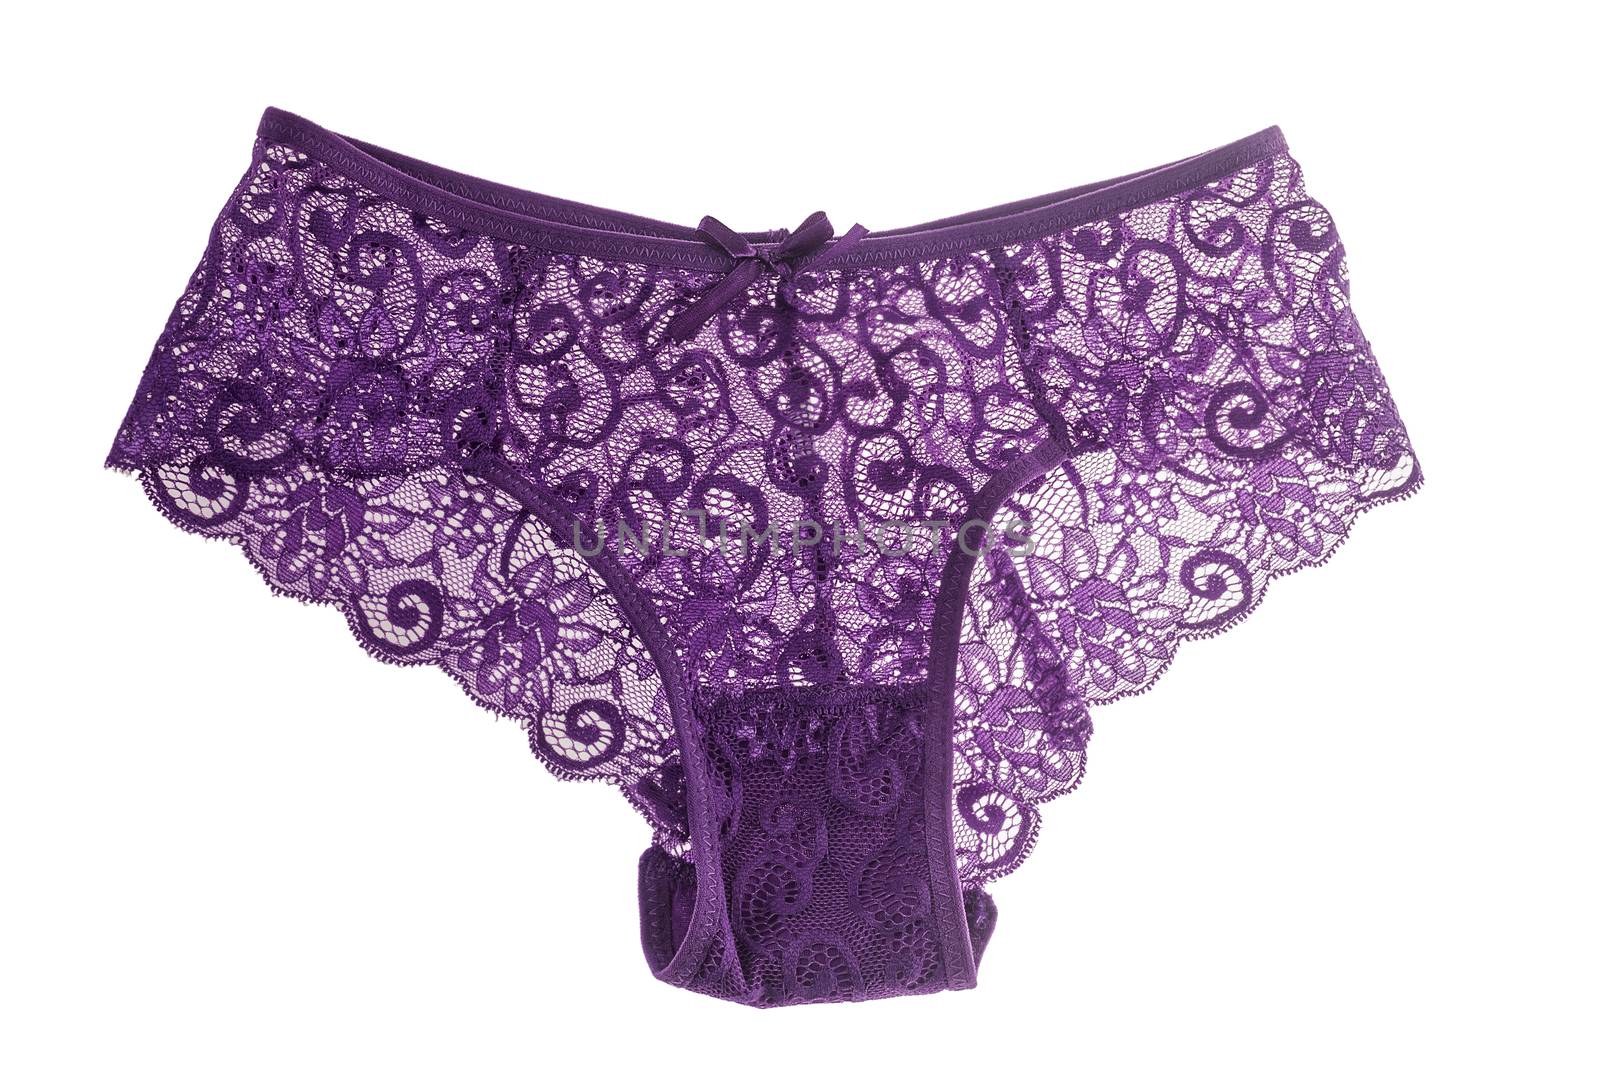 Elegant violet lace panties isolated on white